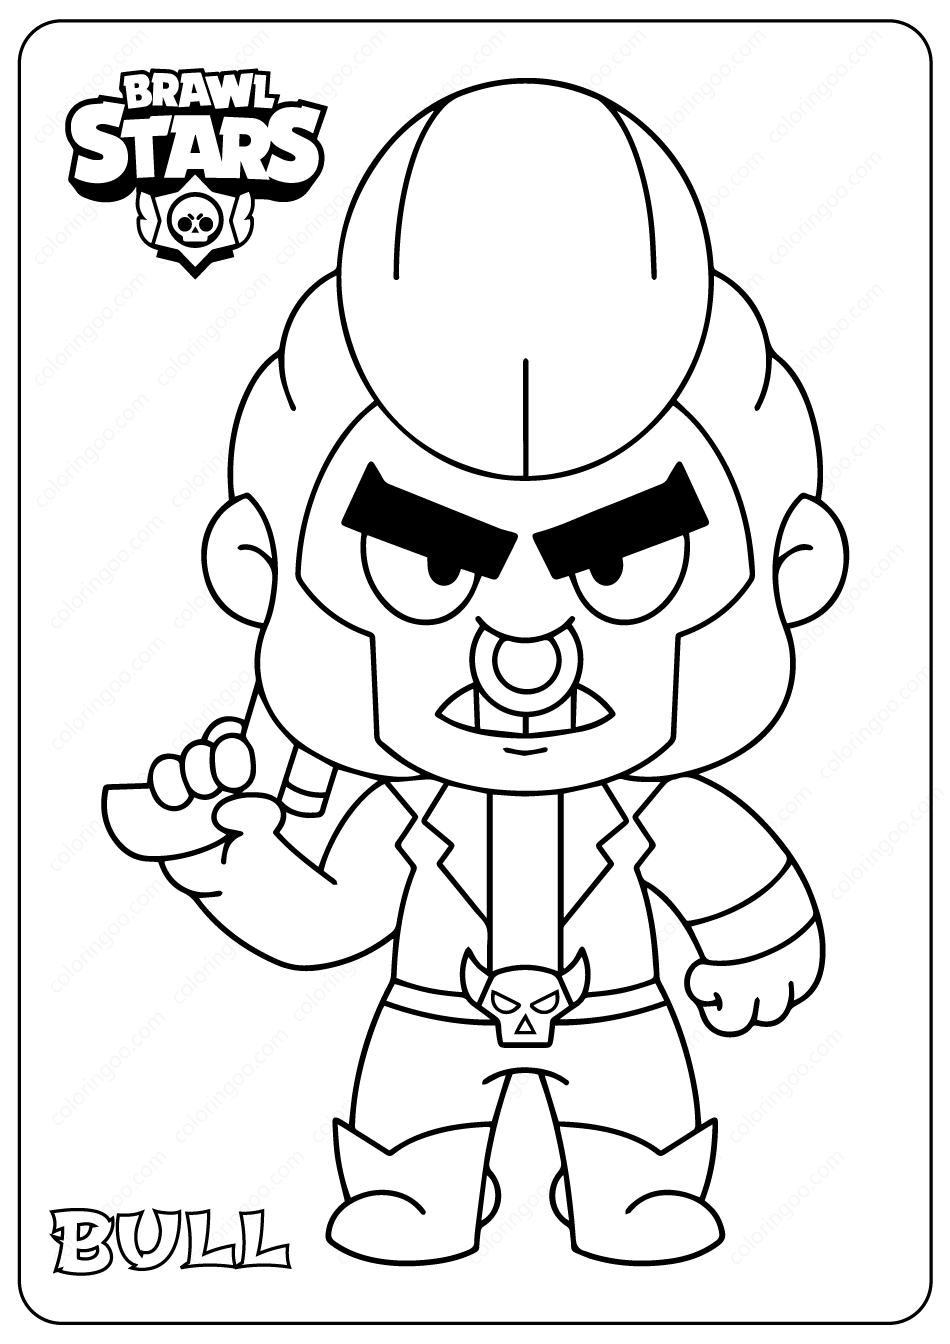 Brawl Stars Coloring Pages Coloring Home - brawl stars colorplate